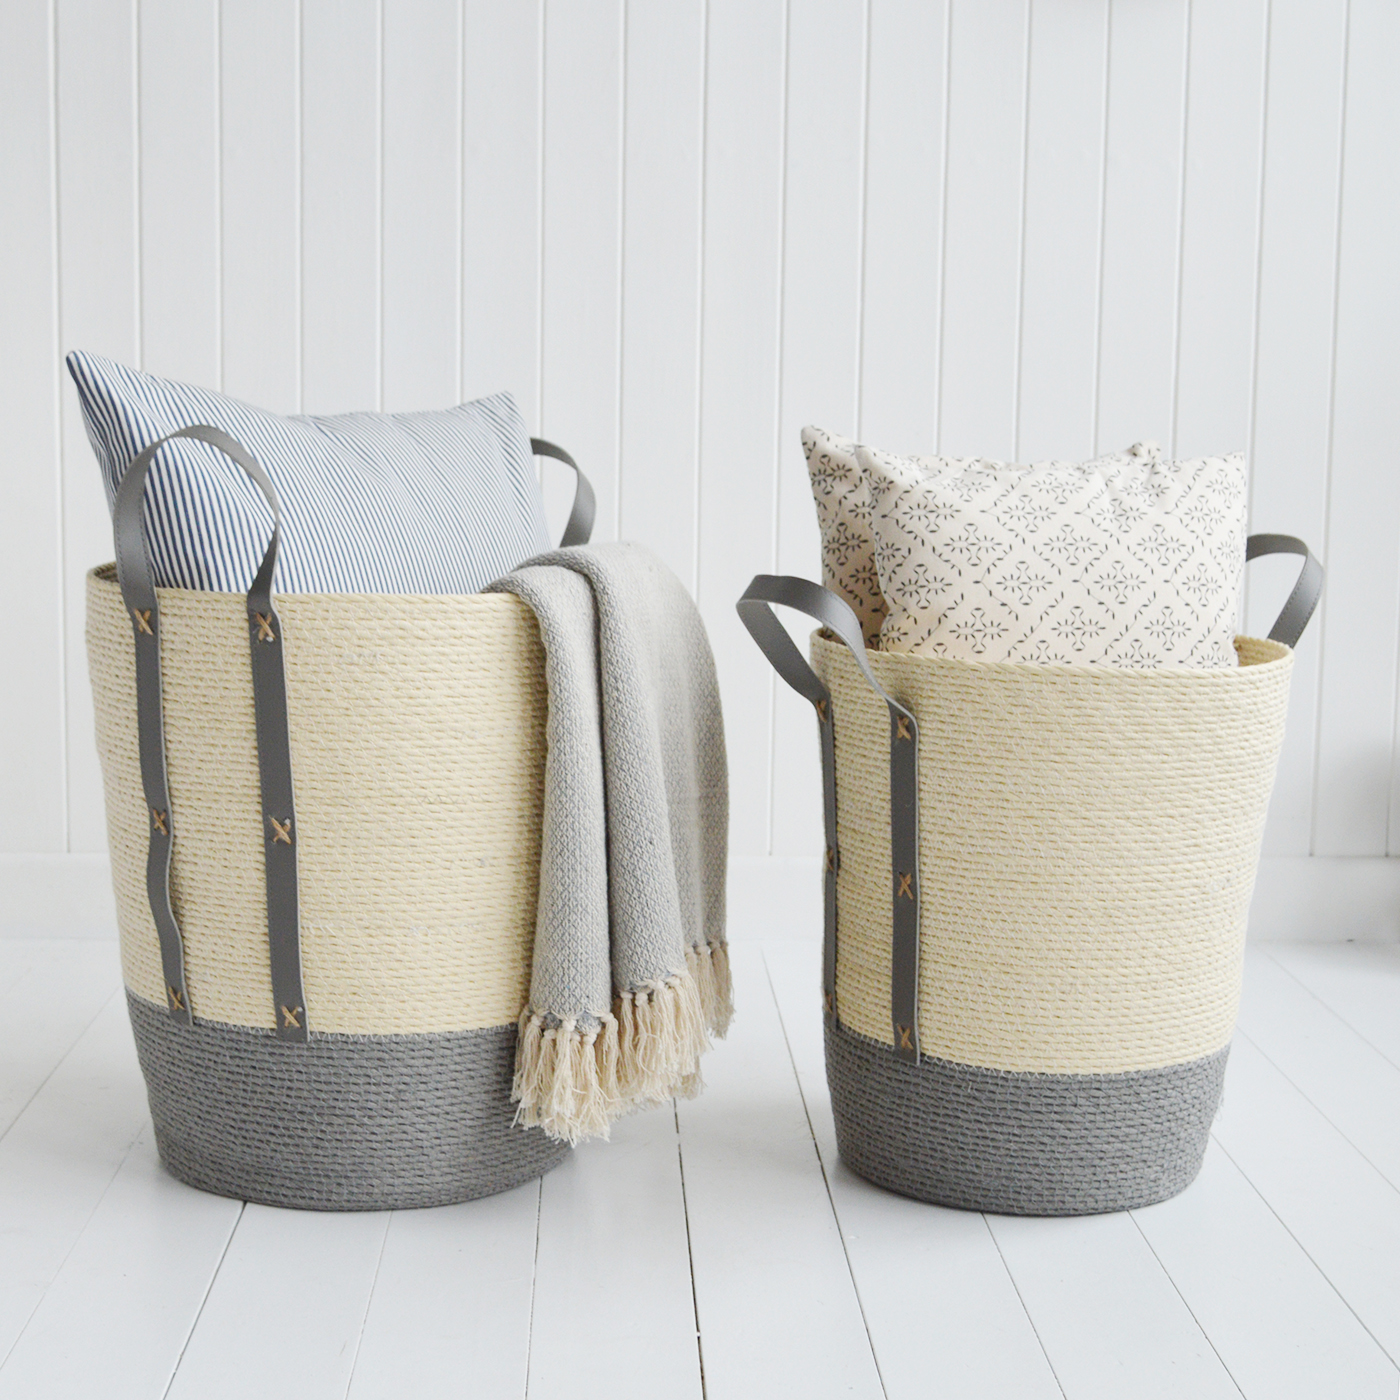 New Hampshire tall set of baskets toys and everyday storage from The White Lighthouse Furniture and Home Interiors for New England, country, coastal farmhouse and city homes for hallway, living room, bedroom and bathroom